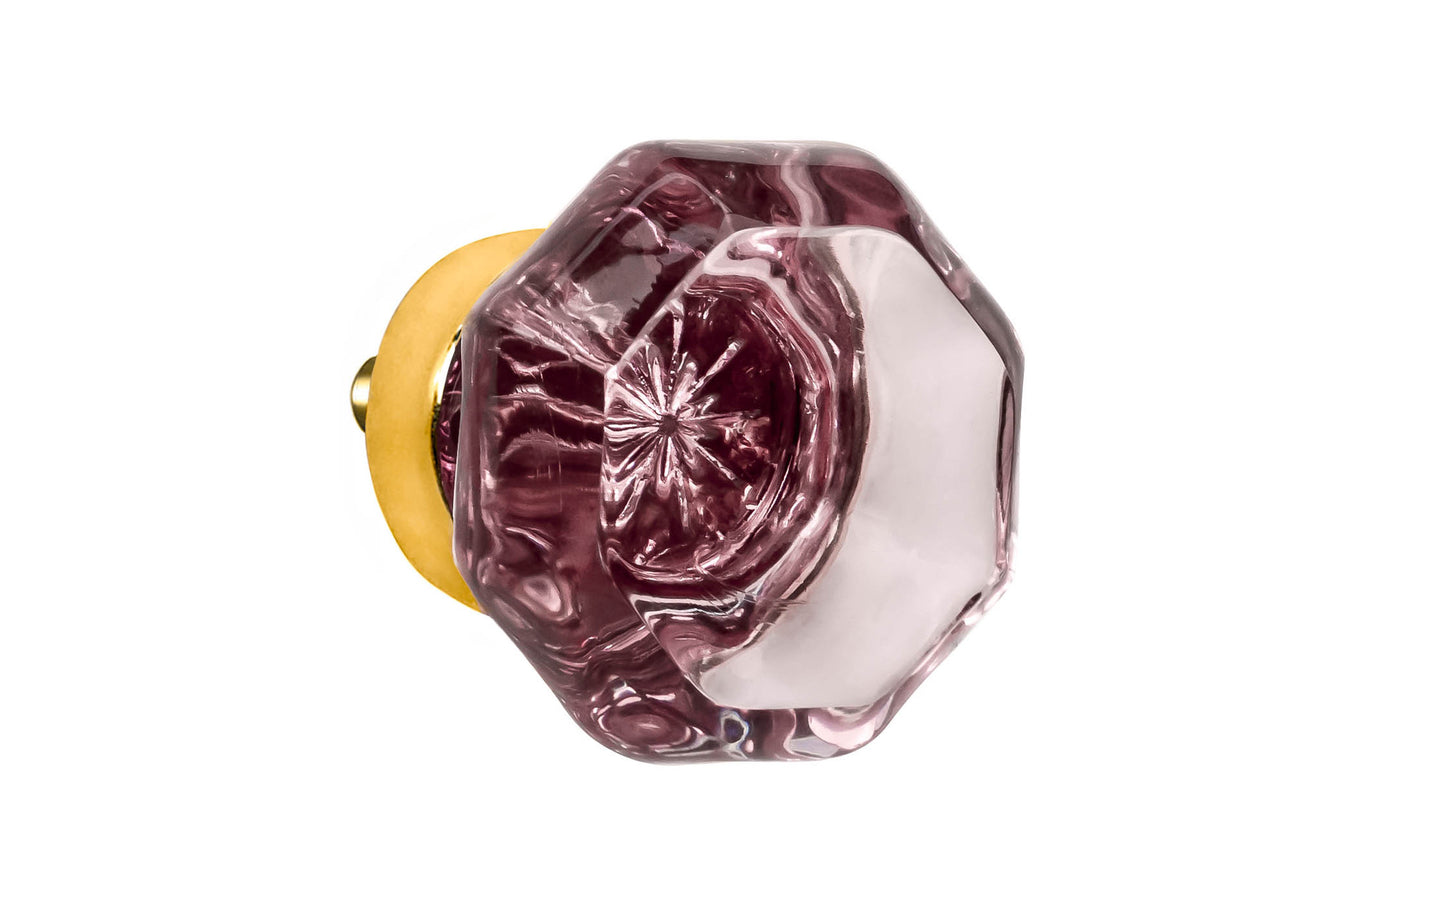 Elegant & classic octagonal cabinet glass knob with an attractive "Purple Amethyst" color. The glass is carefully set into a handsome solid brass base with a threaded shank in the back. Un-lacquered solid brass base (will patina over time). Octagon shape knob. 1-1/4" Diameter Knob 